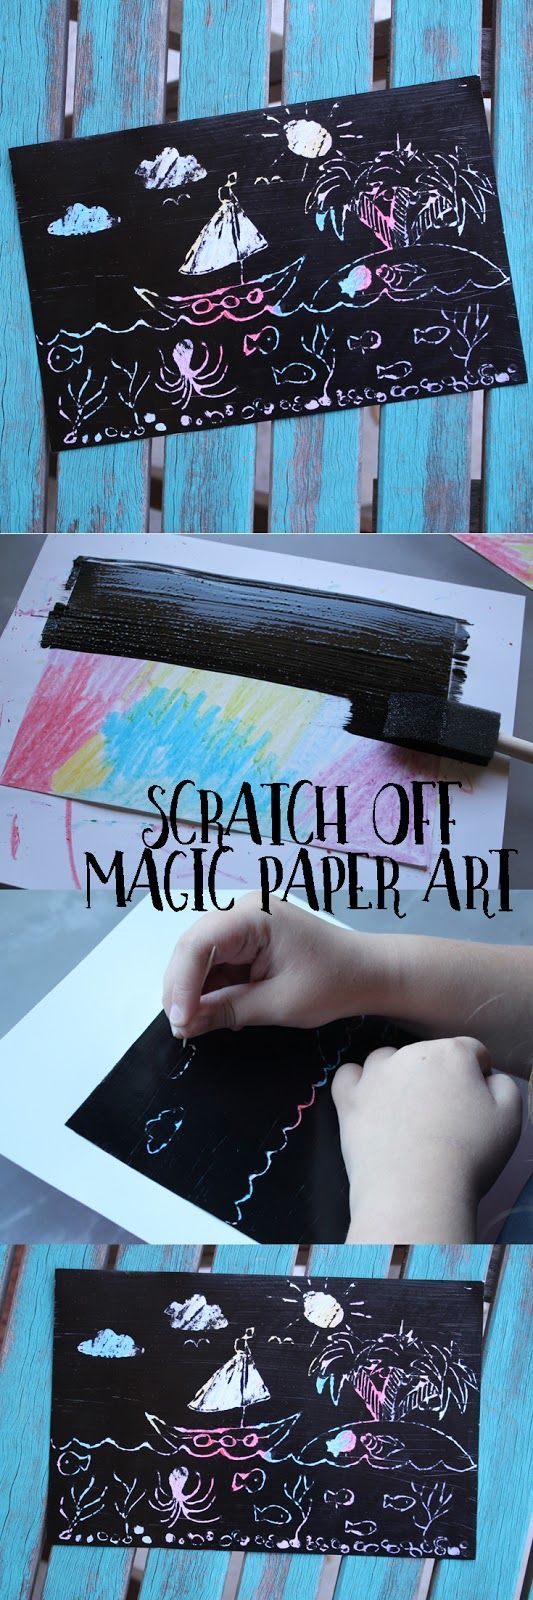 Scratch off magic paper art is an easy and fun craft for kids of all ages. Its so cool!